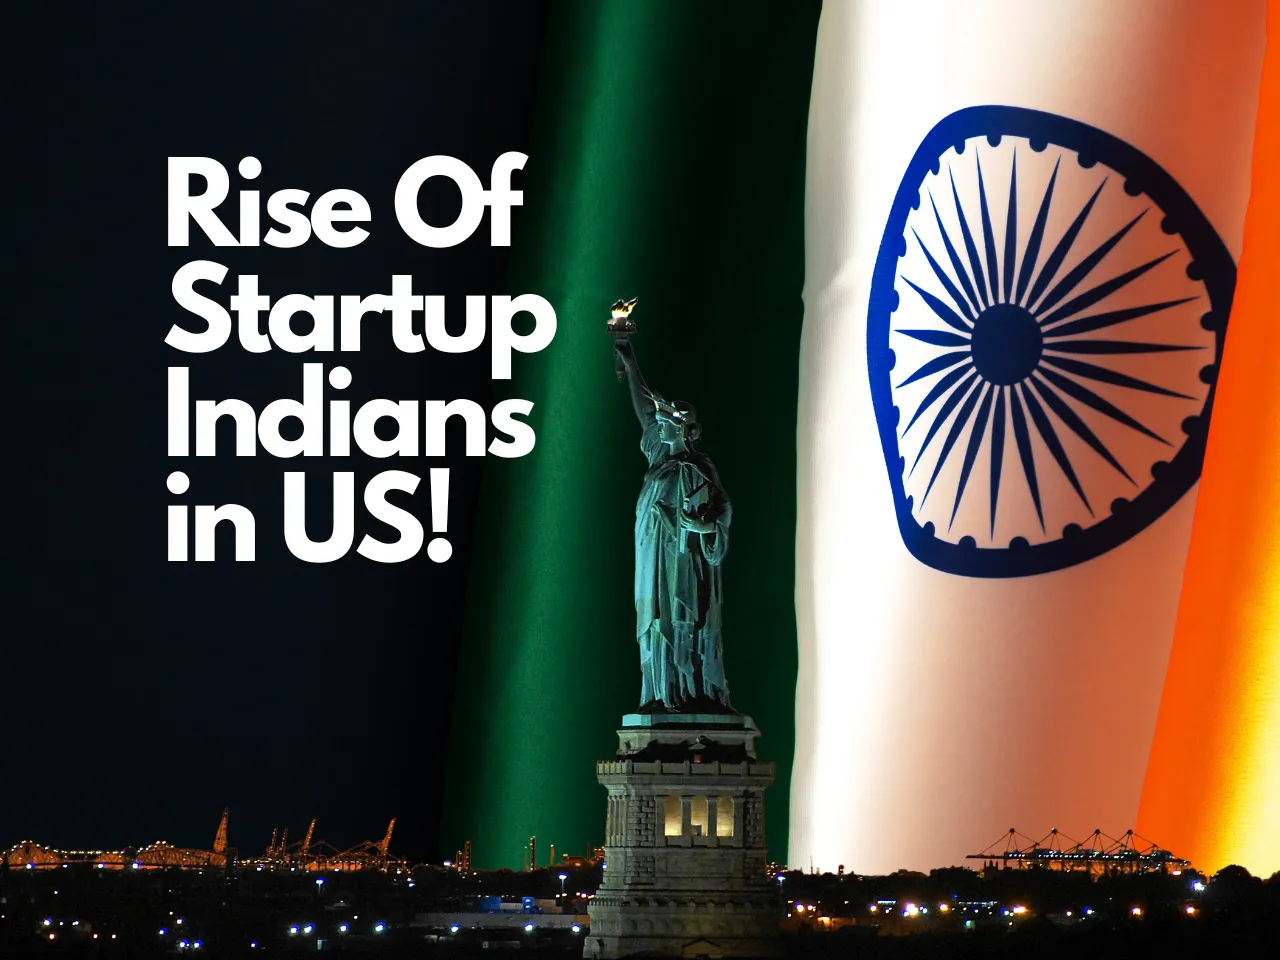 Why Indian's Excel in the US? The Traditional Indian Startup Culture!